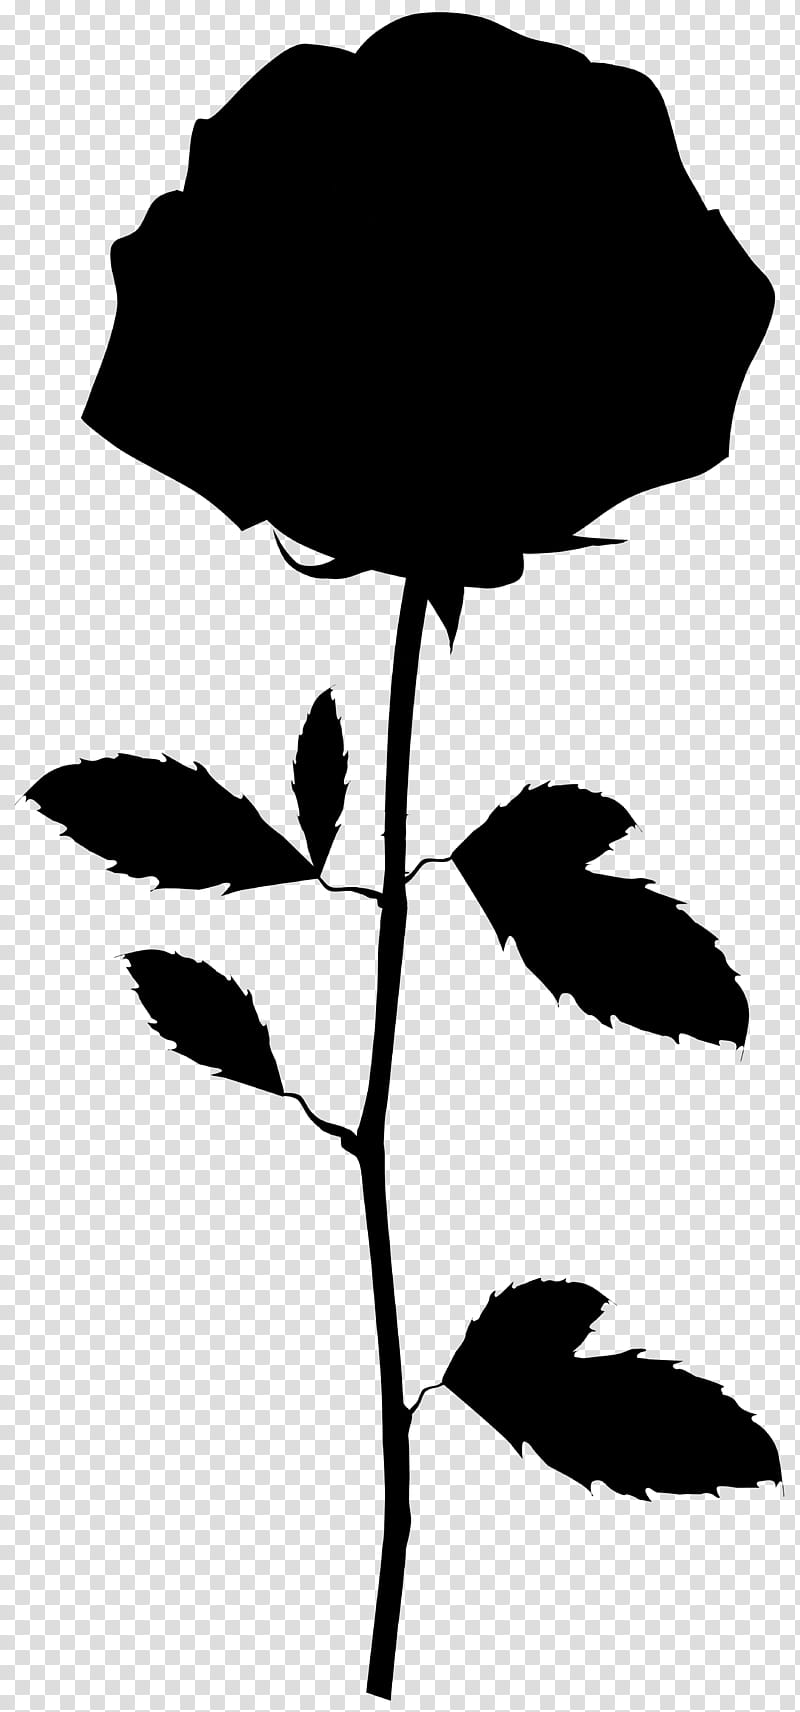 Love Black And White, Leaf, Plant Stem, Petal, Plants, May 20, Shot Puts, Temperate Climate transparent background PNG clipart